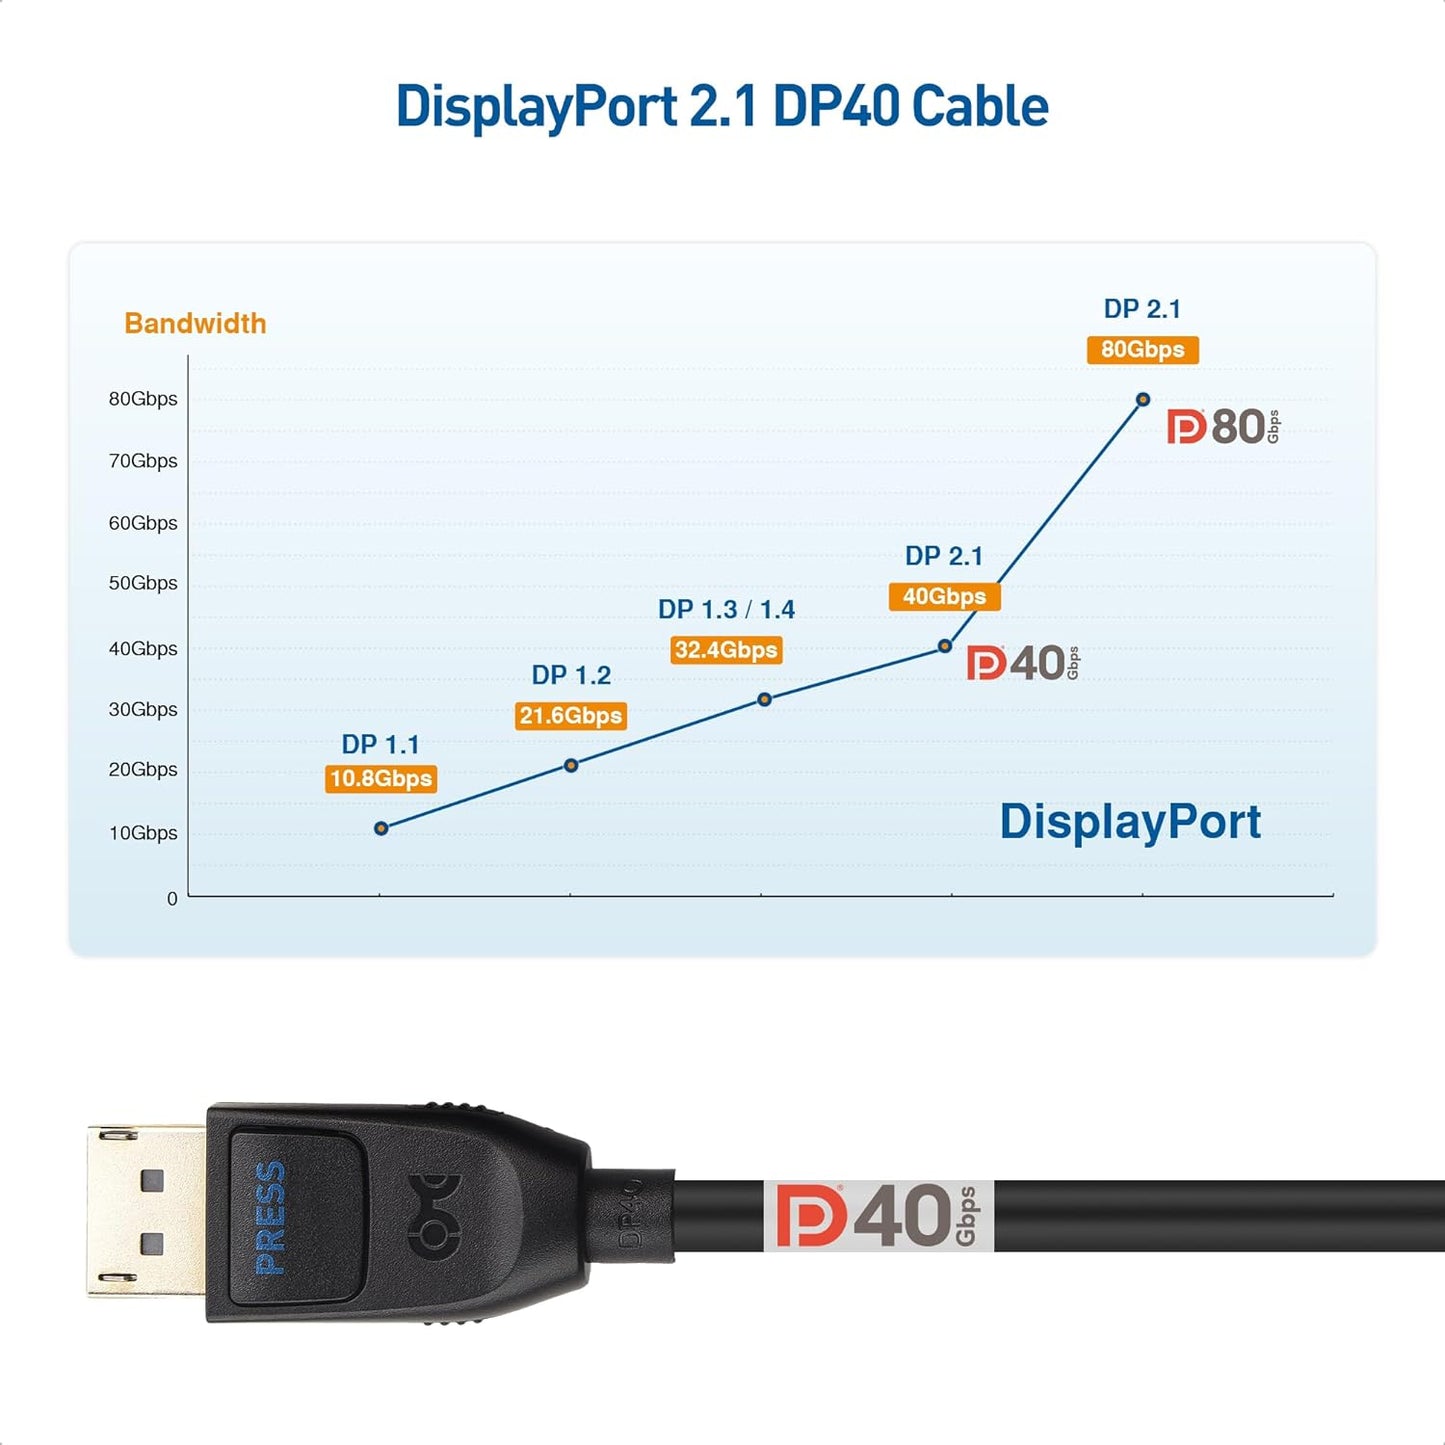 Cable Matters VESA Certified DisplayPort 2.1 Cable, 2m/6.6ft